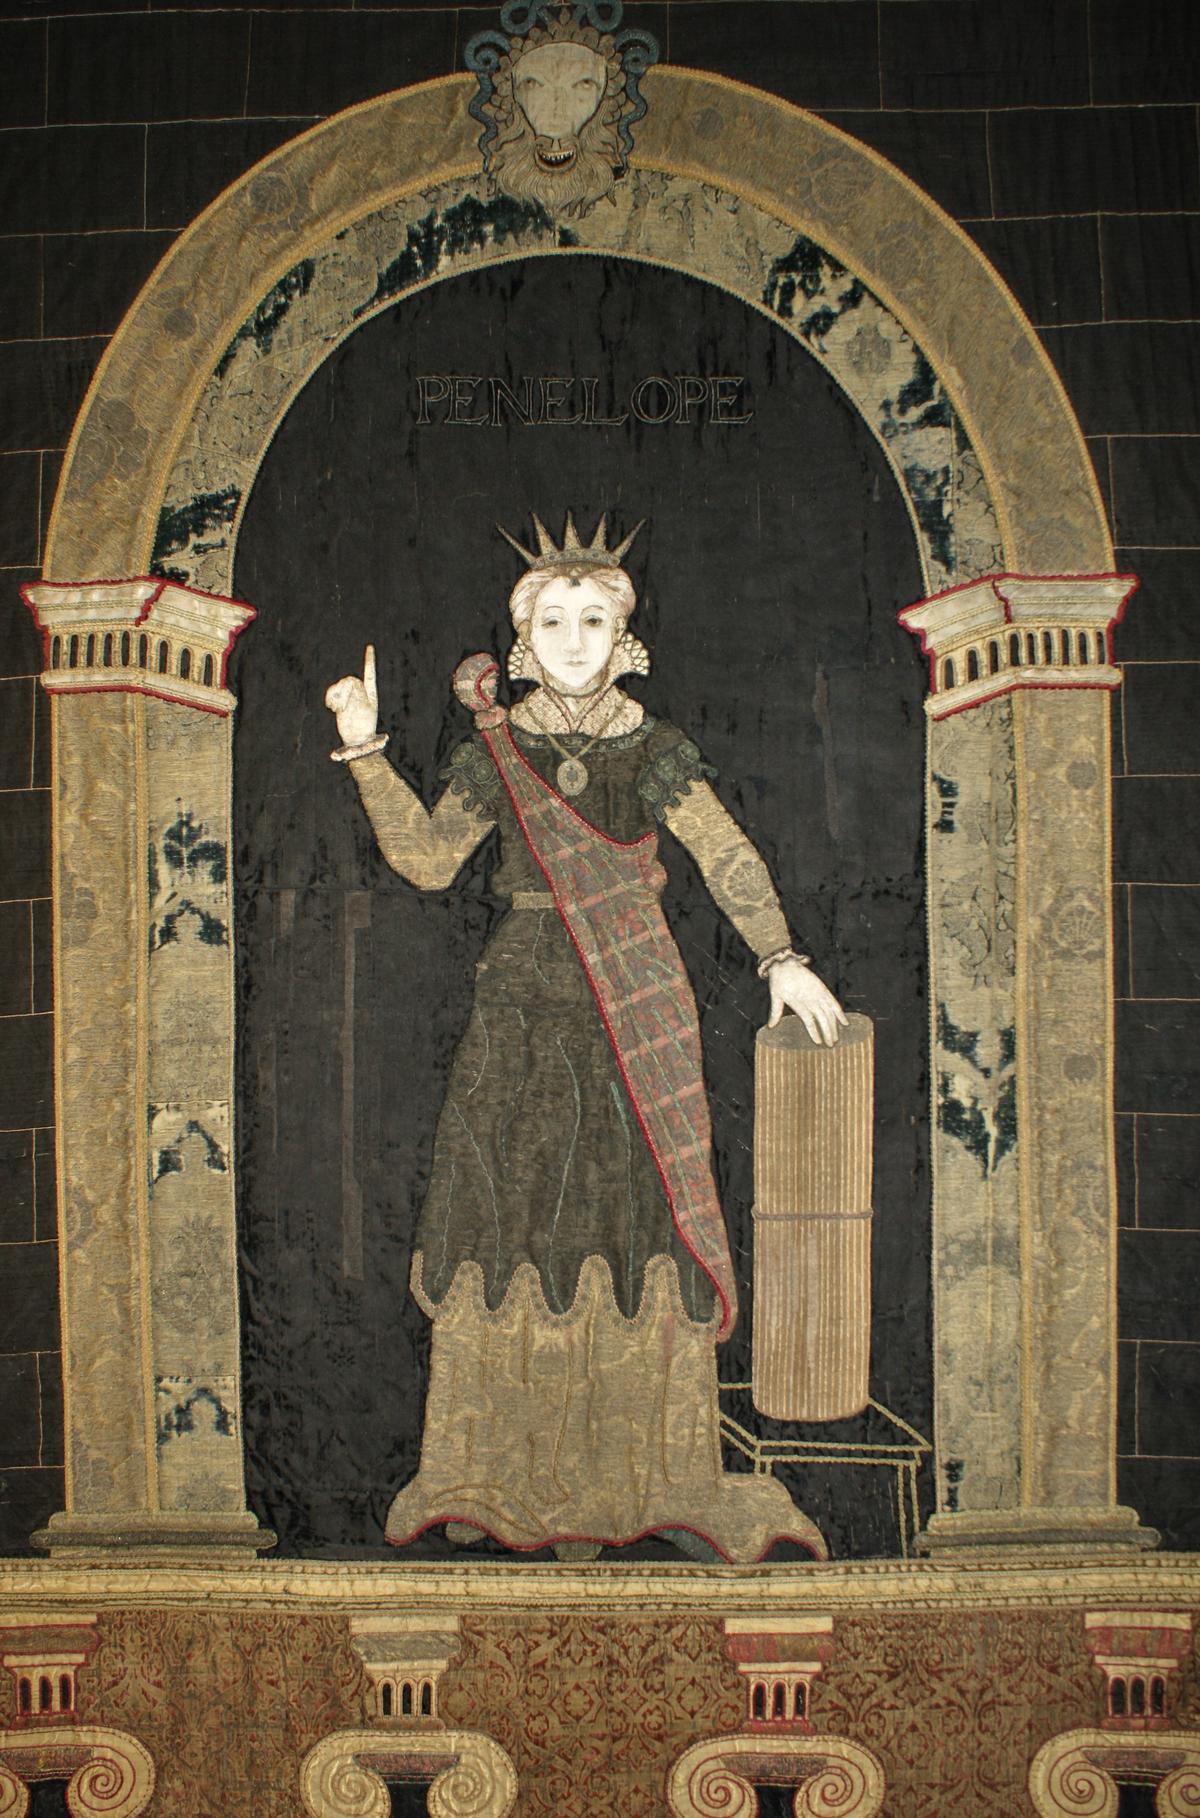 During the English Renaissance, stories from the ancient world inspired many educated people. In the 1570s, five wall hangings of noblewomen, featuring five ladies and their allegorical virtues, were made at Chatsworth House, in England. Here is a detail of Penelope. (Claire Hill/National Trust)